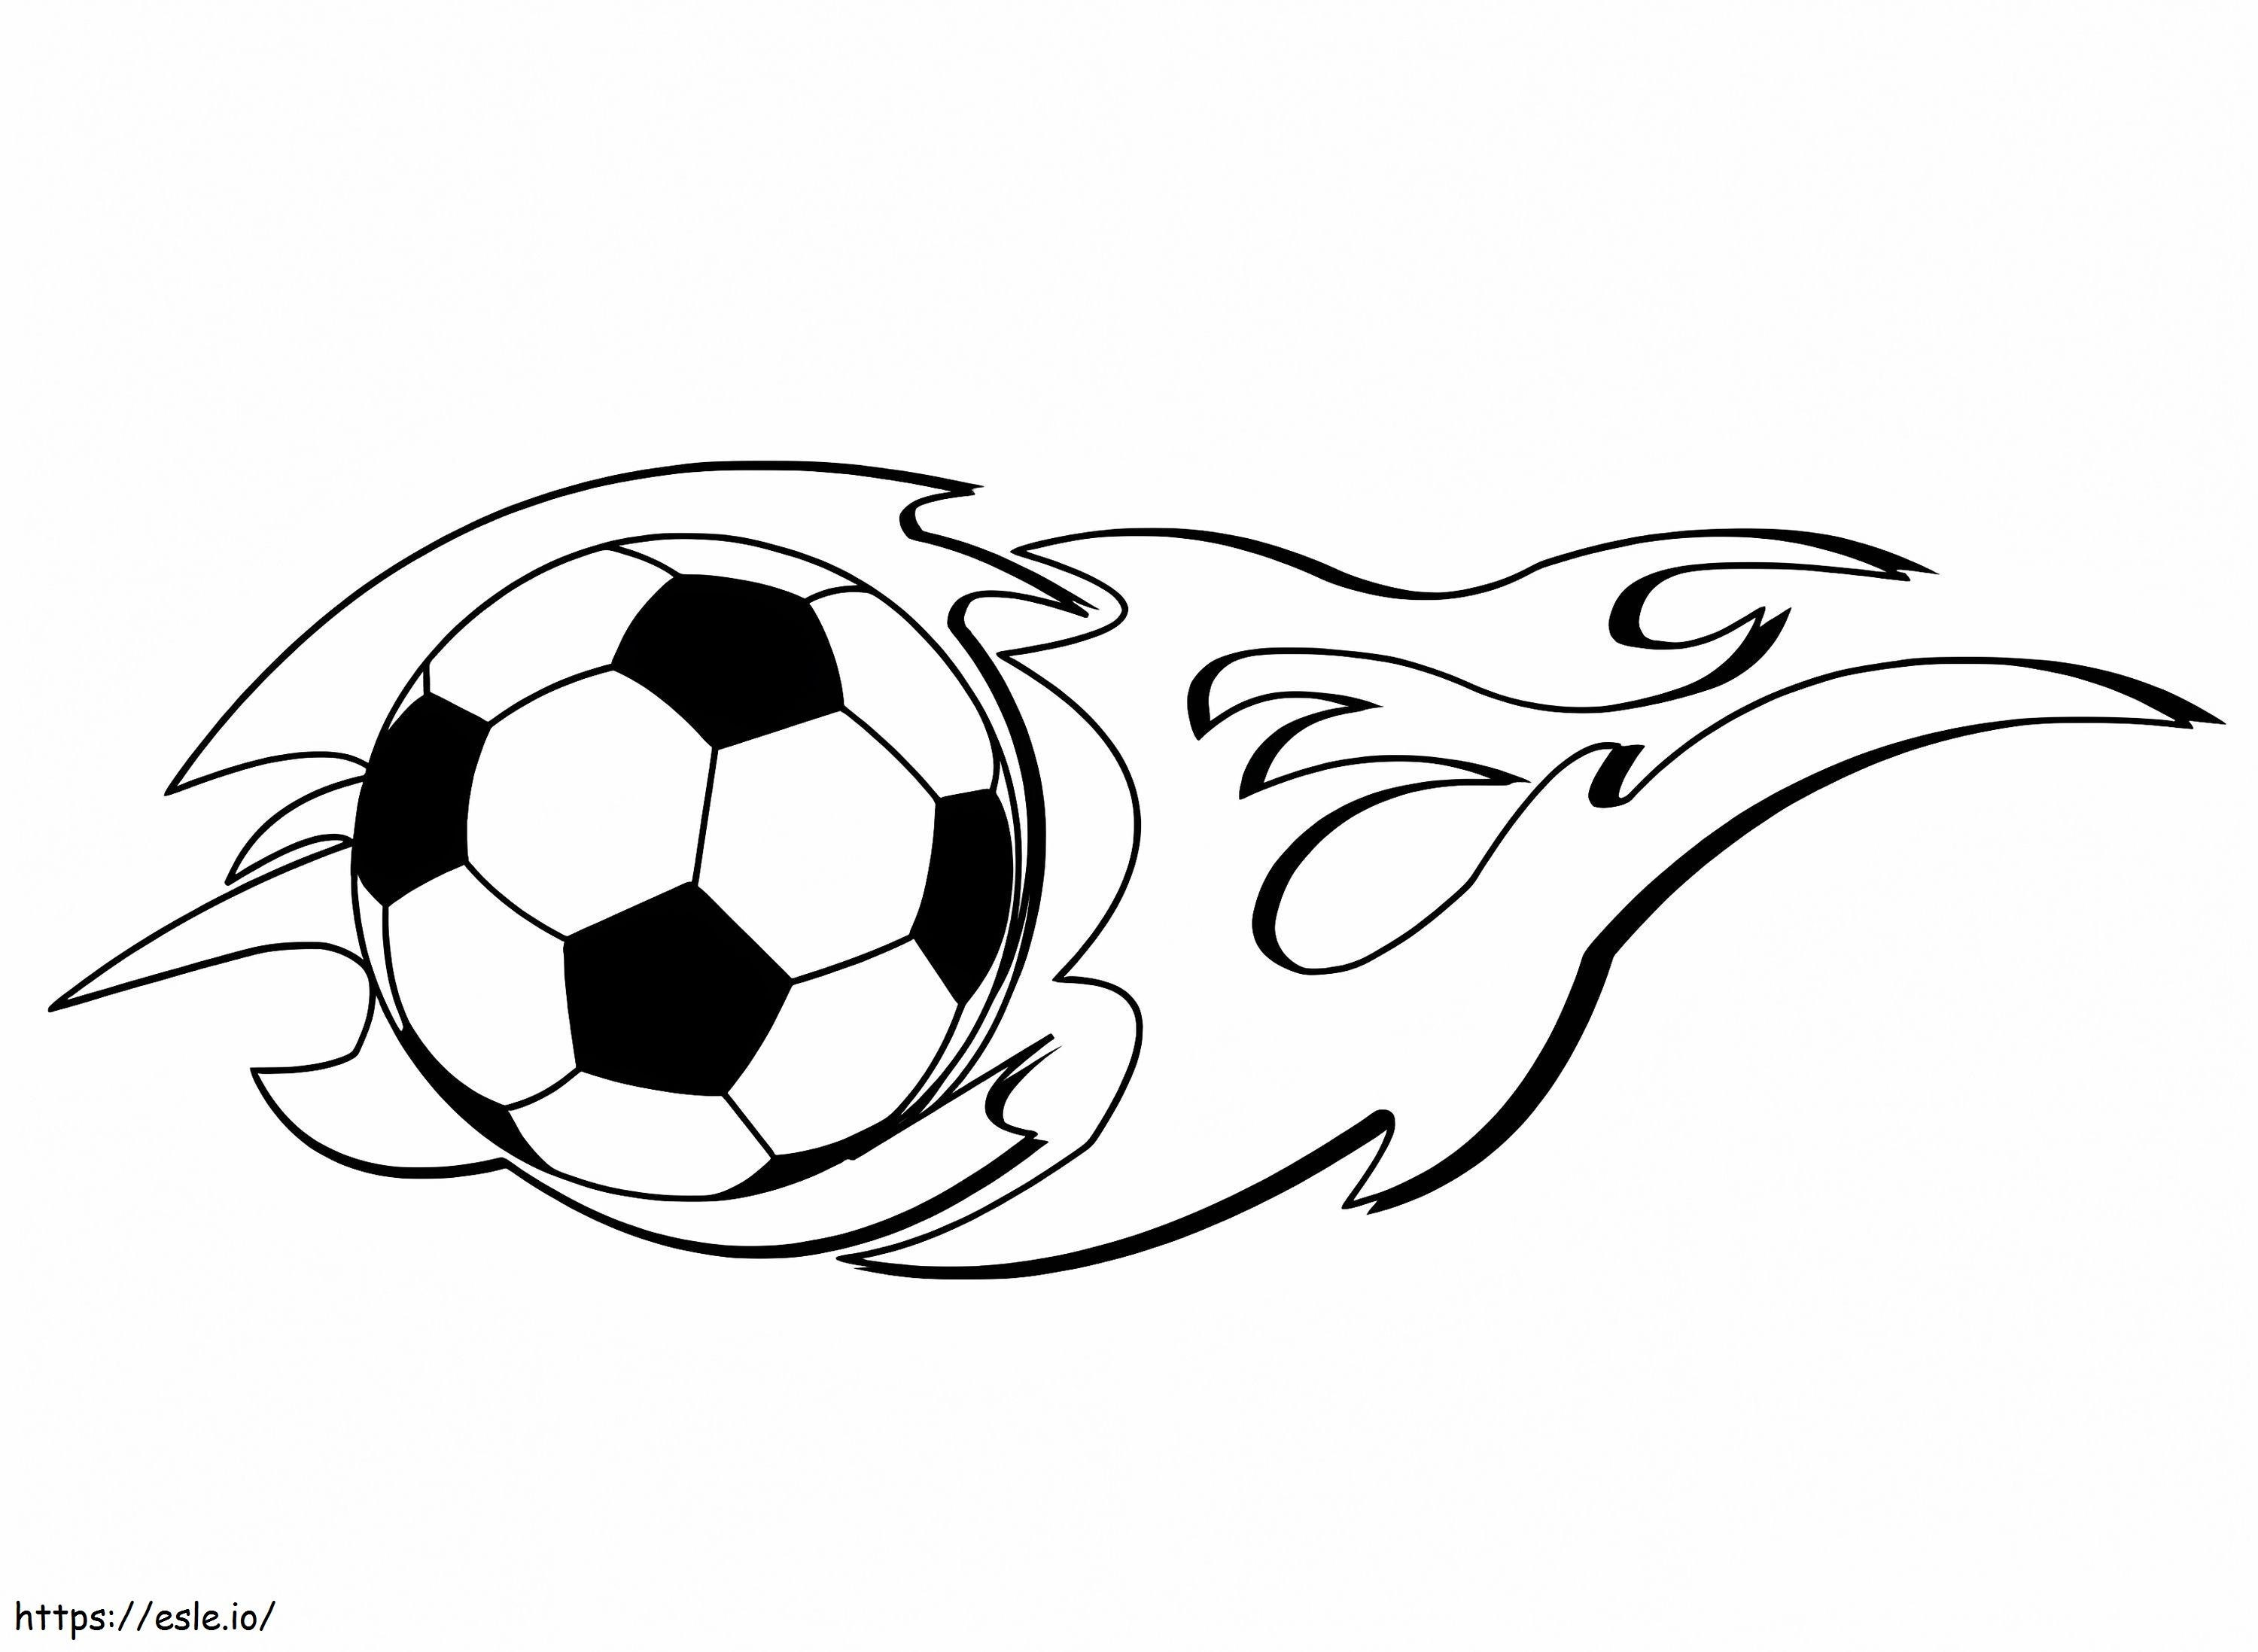 The Ball Is On Fire coloring page